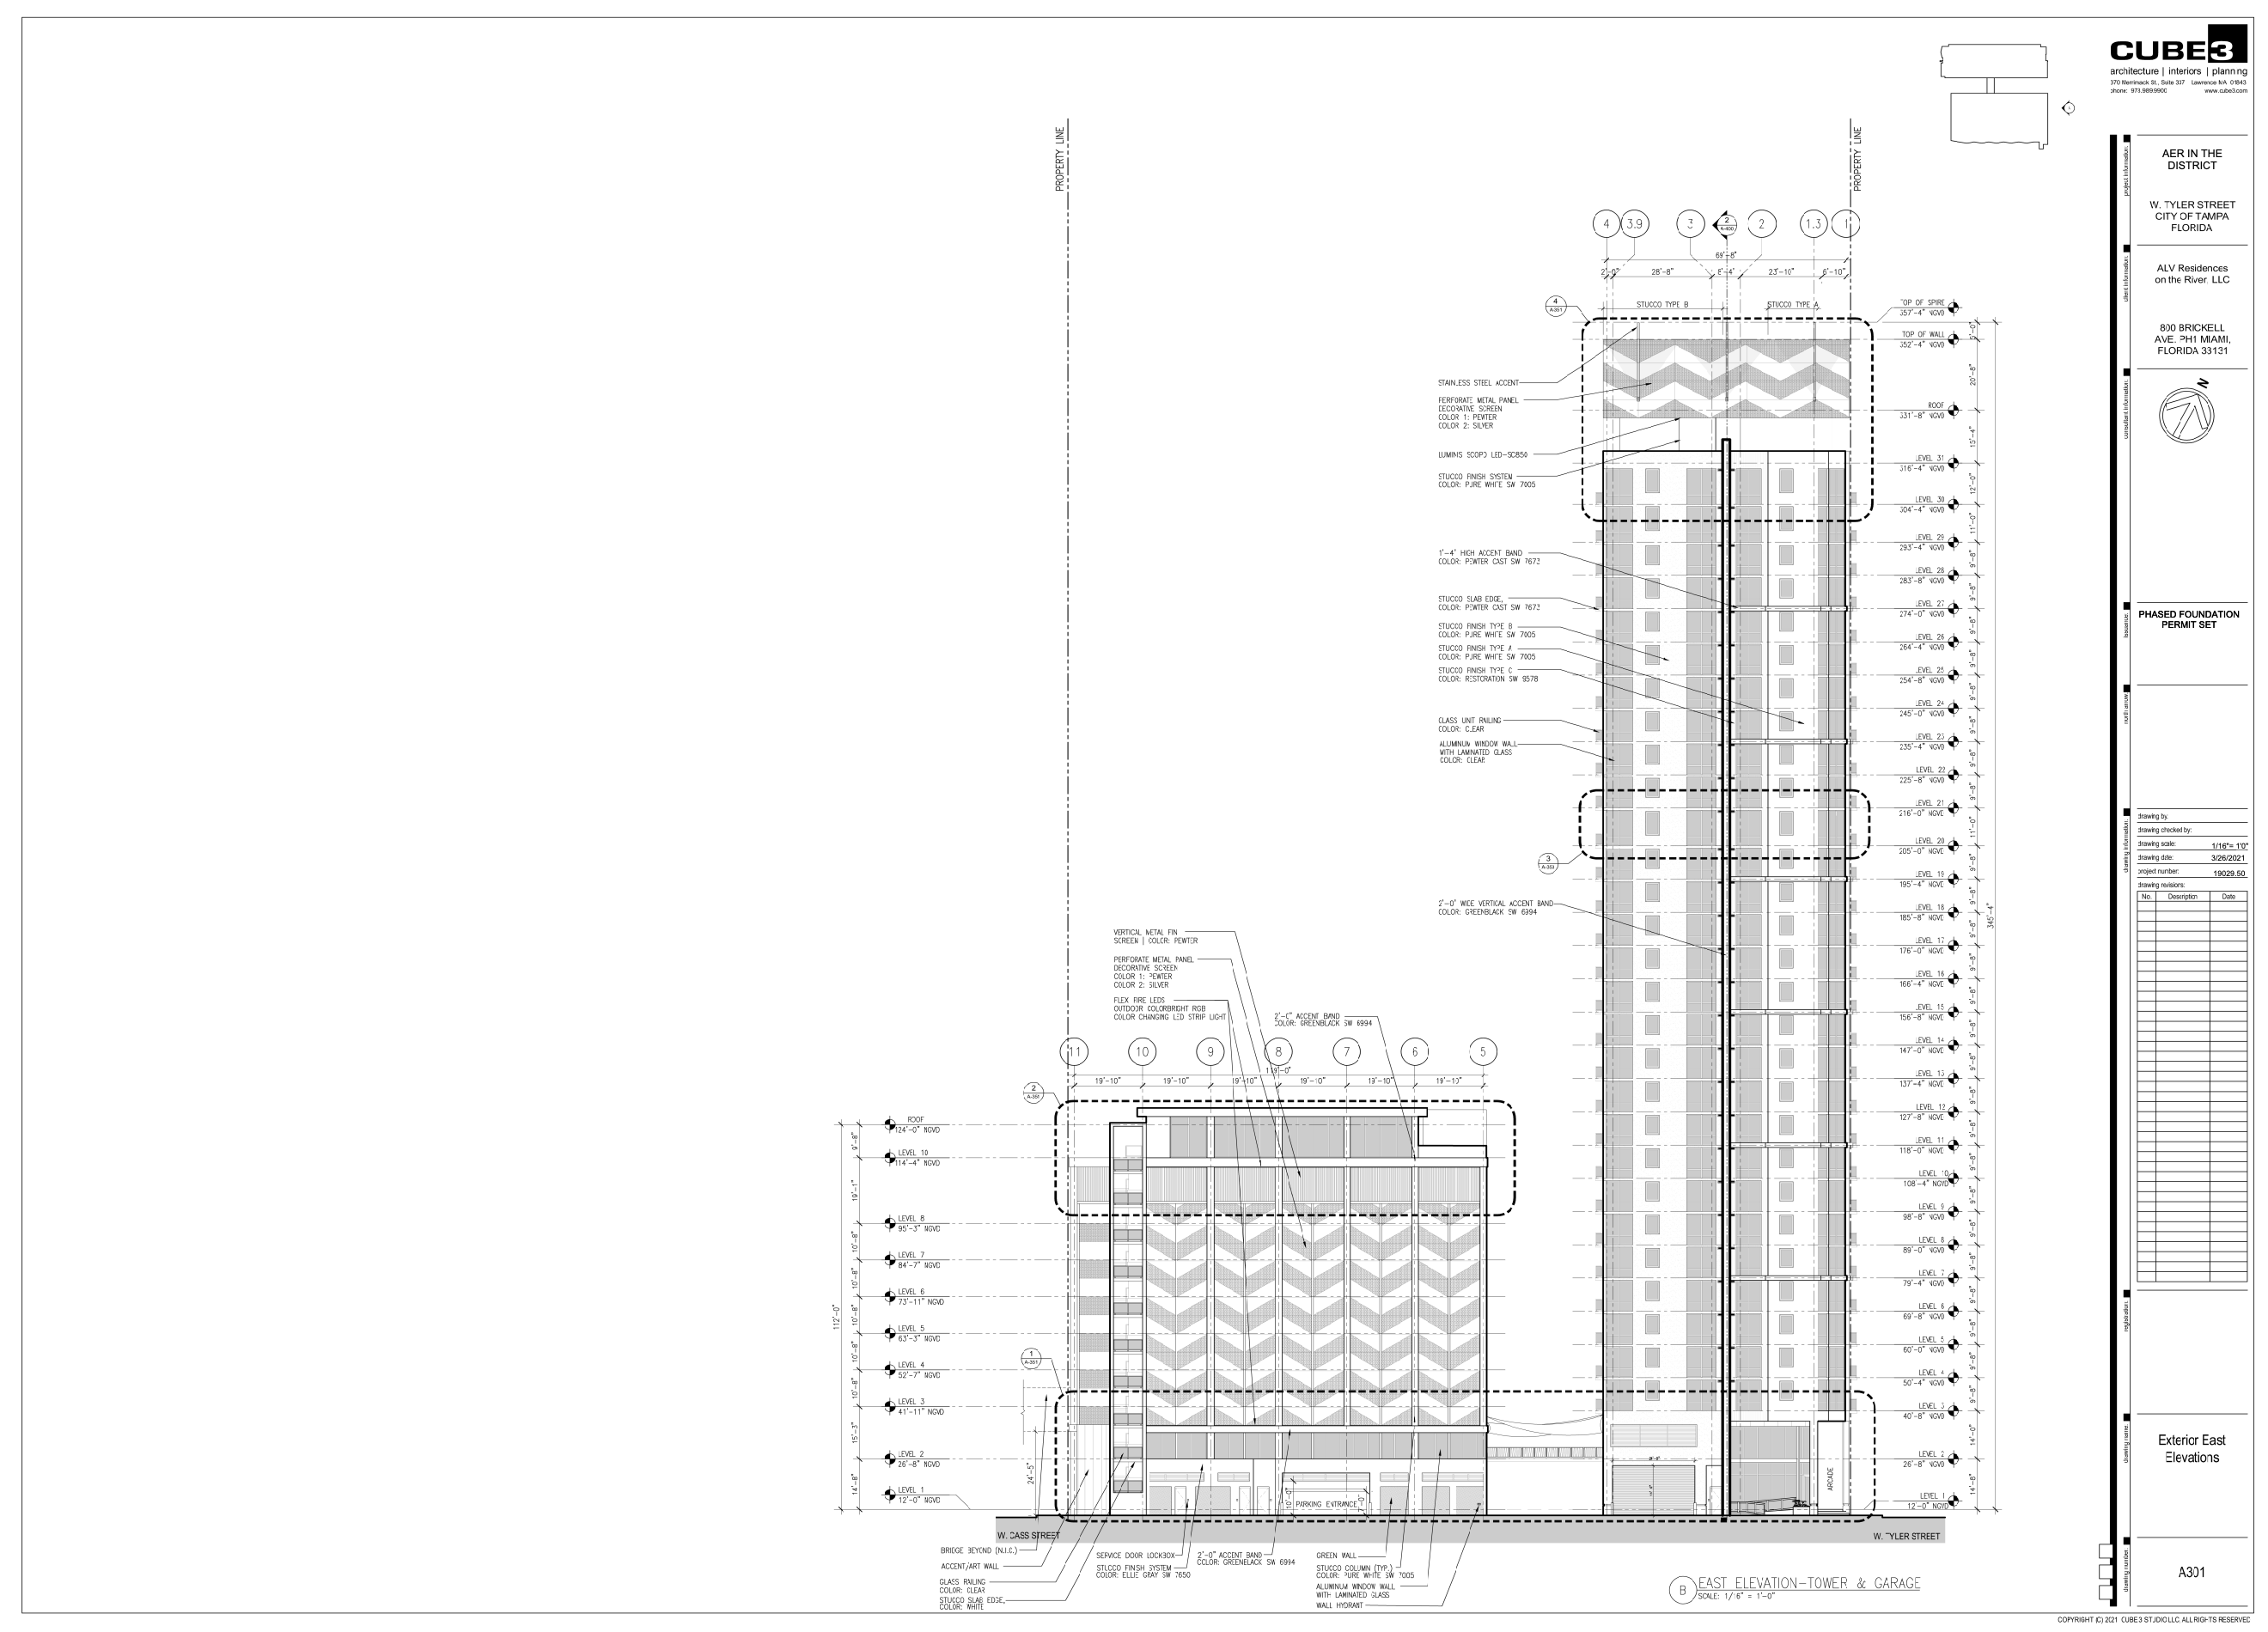 Eastern Elevation - Architectural Plans, courtesy of Cube3